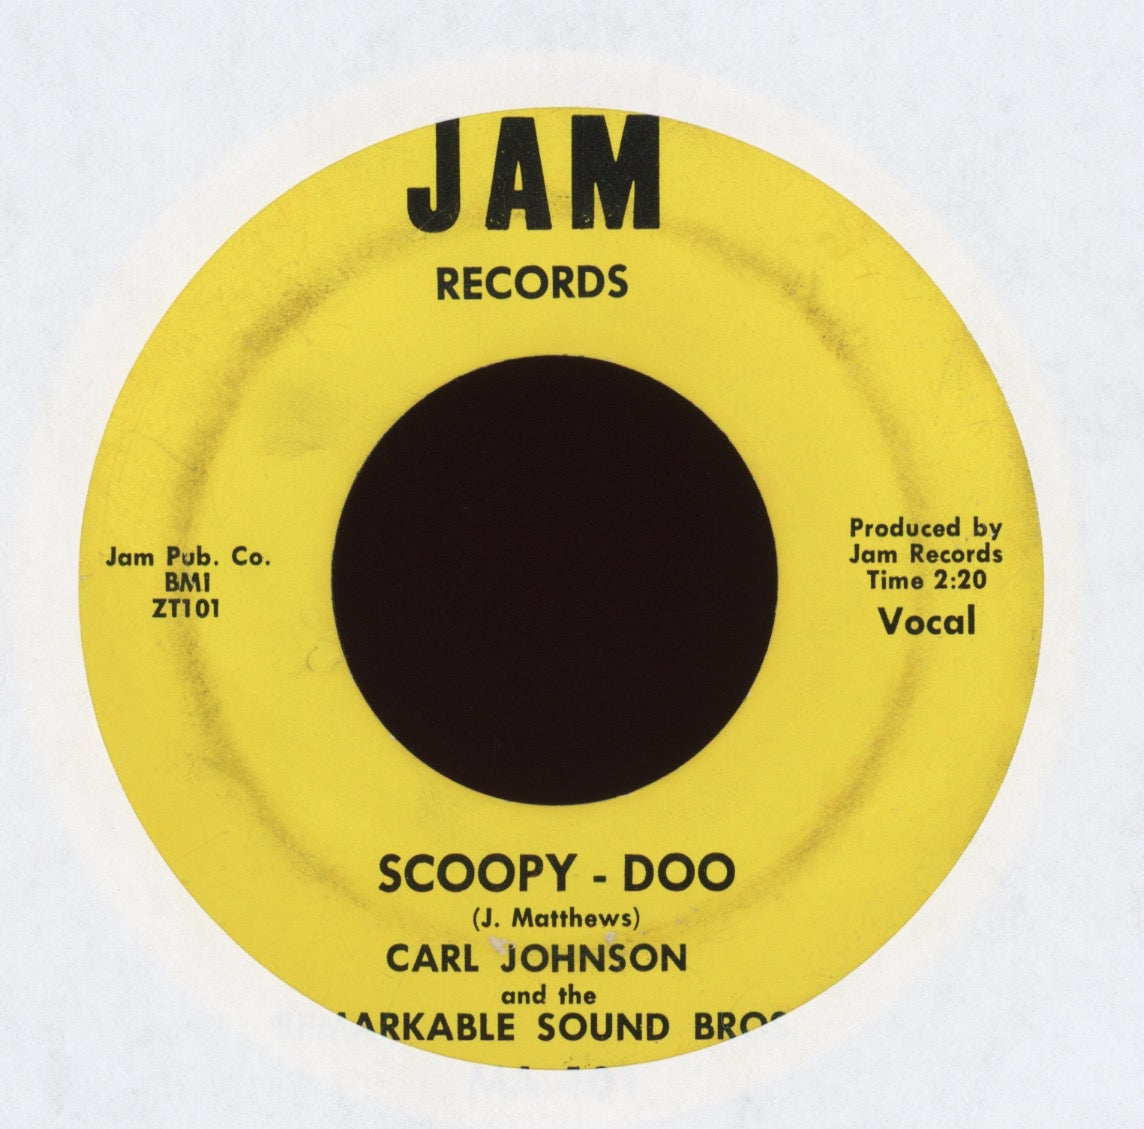 Carl Johnson & The Remarkable Sound Bros. - Scoopy - Doo on Jam Funk 45